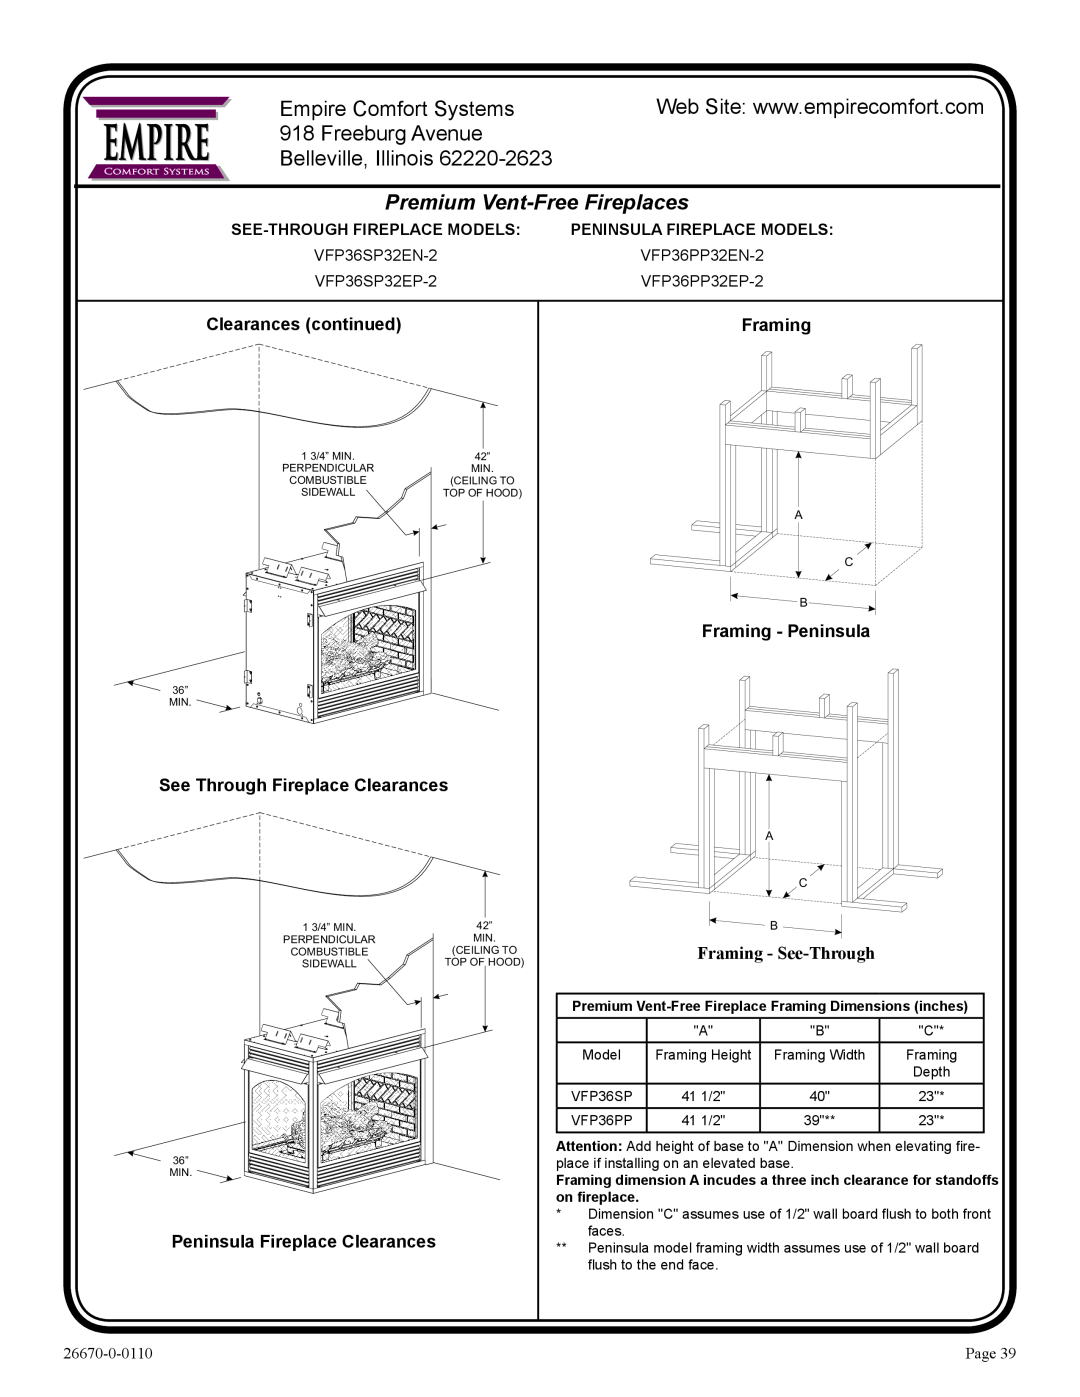 Empire Comfort Systems VFP36PP32EP-2 Empire Comfort Systems, Belleville, Illinois, Freeburg Avenue, Framing, Page 